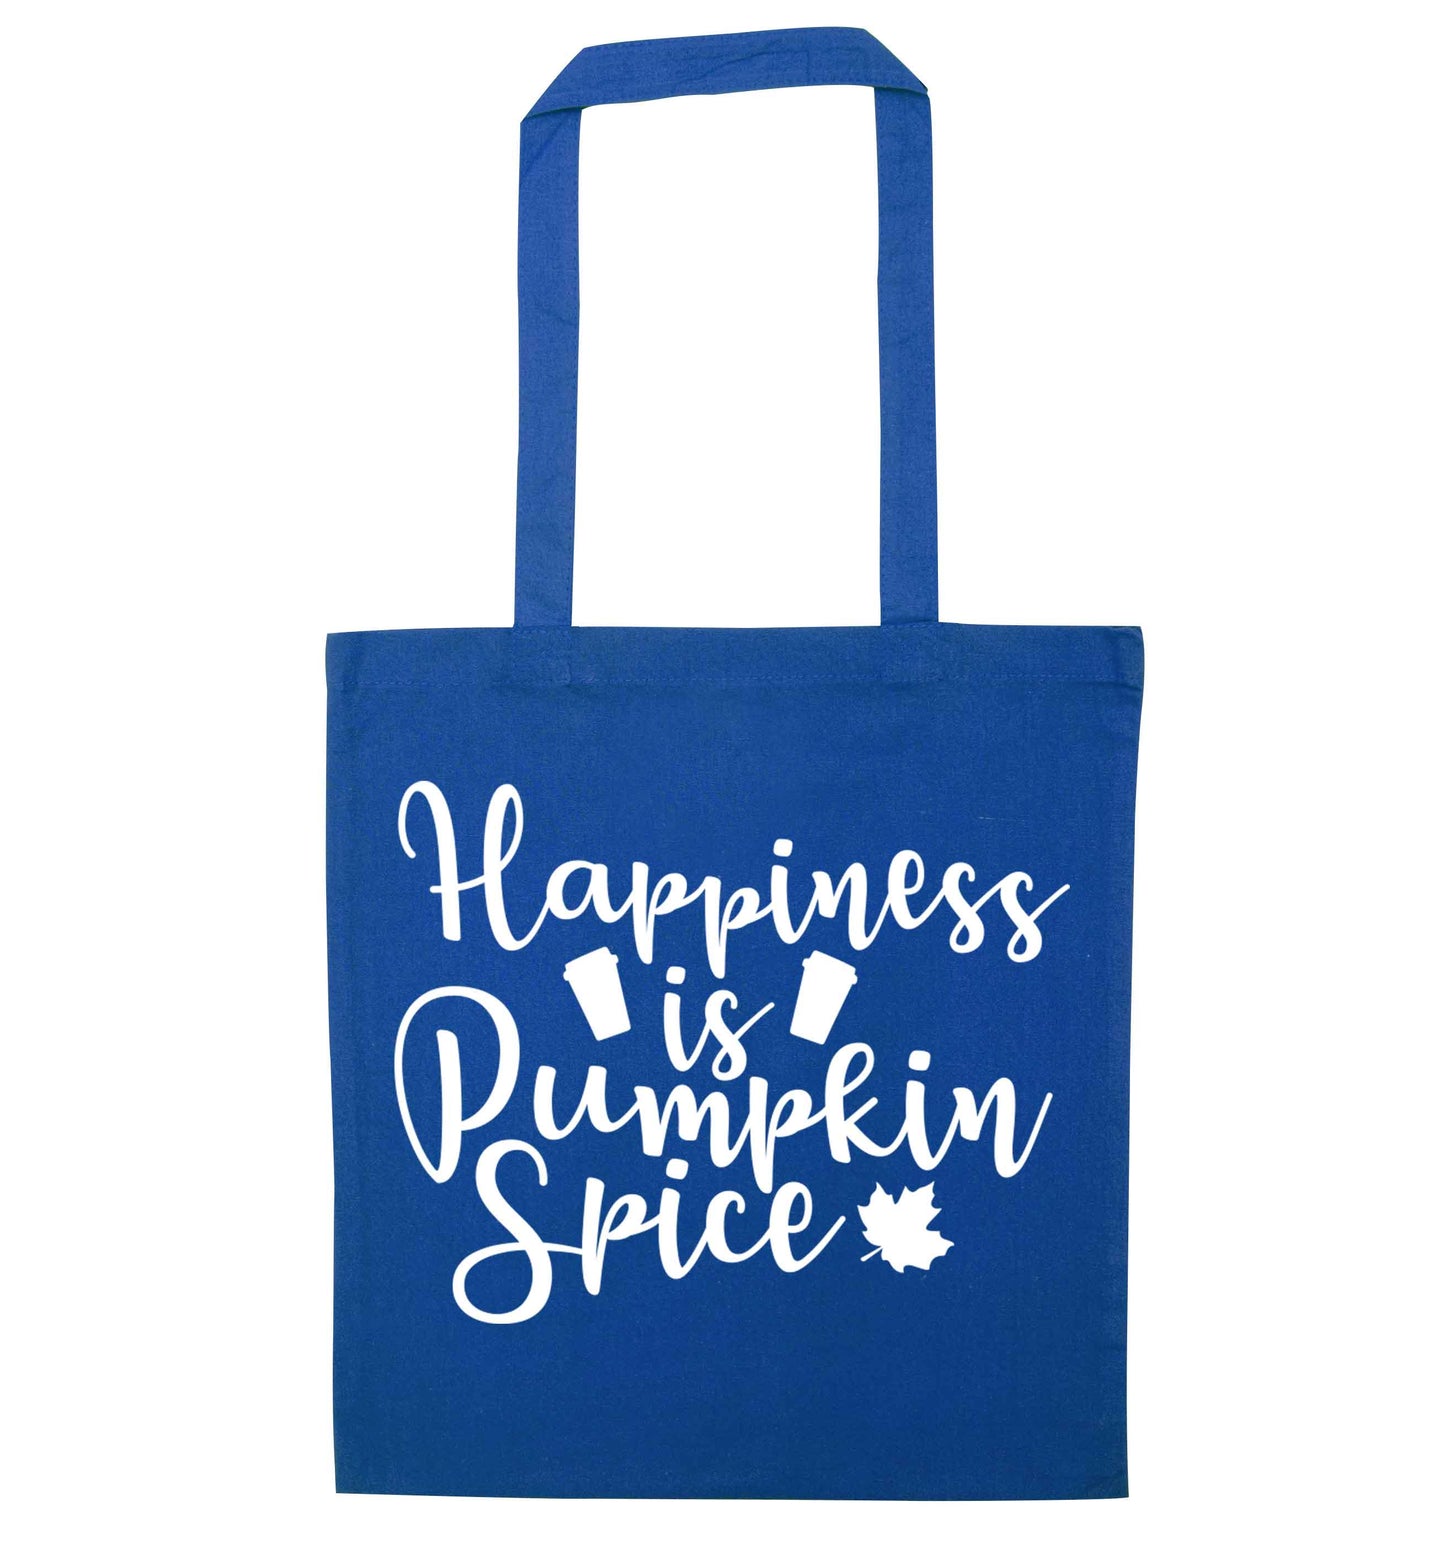 Happiness Pumpkin Spice blue tote bag